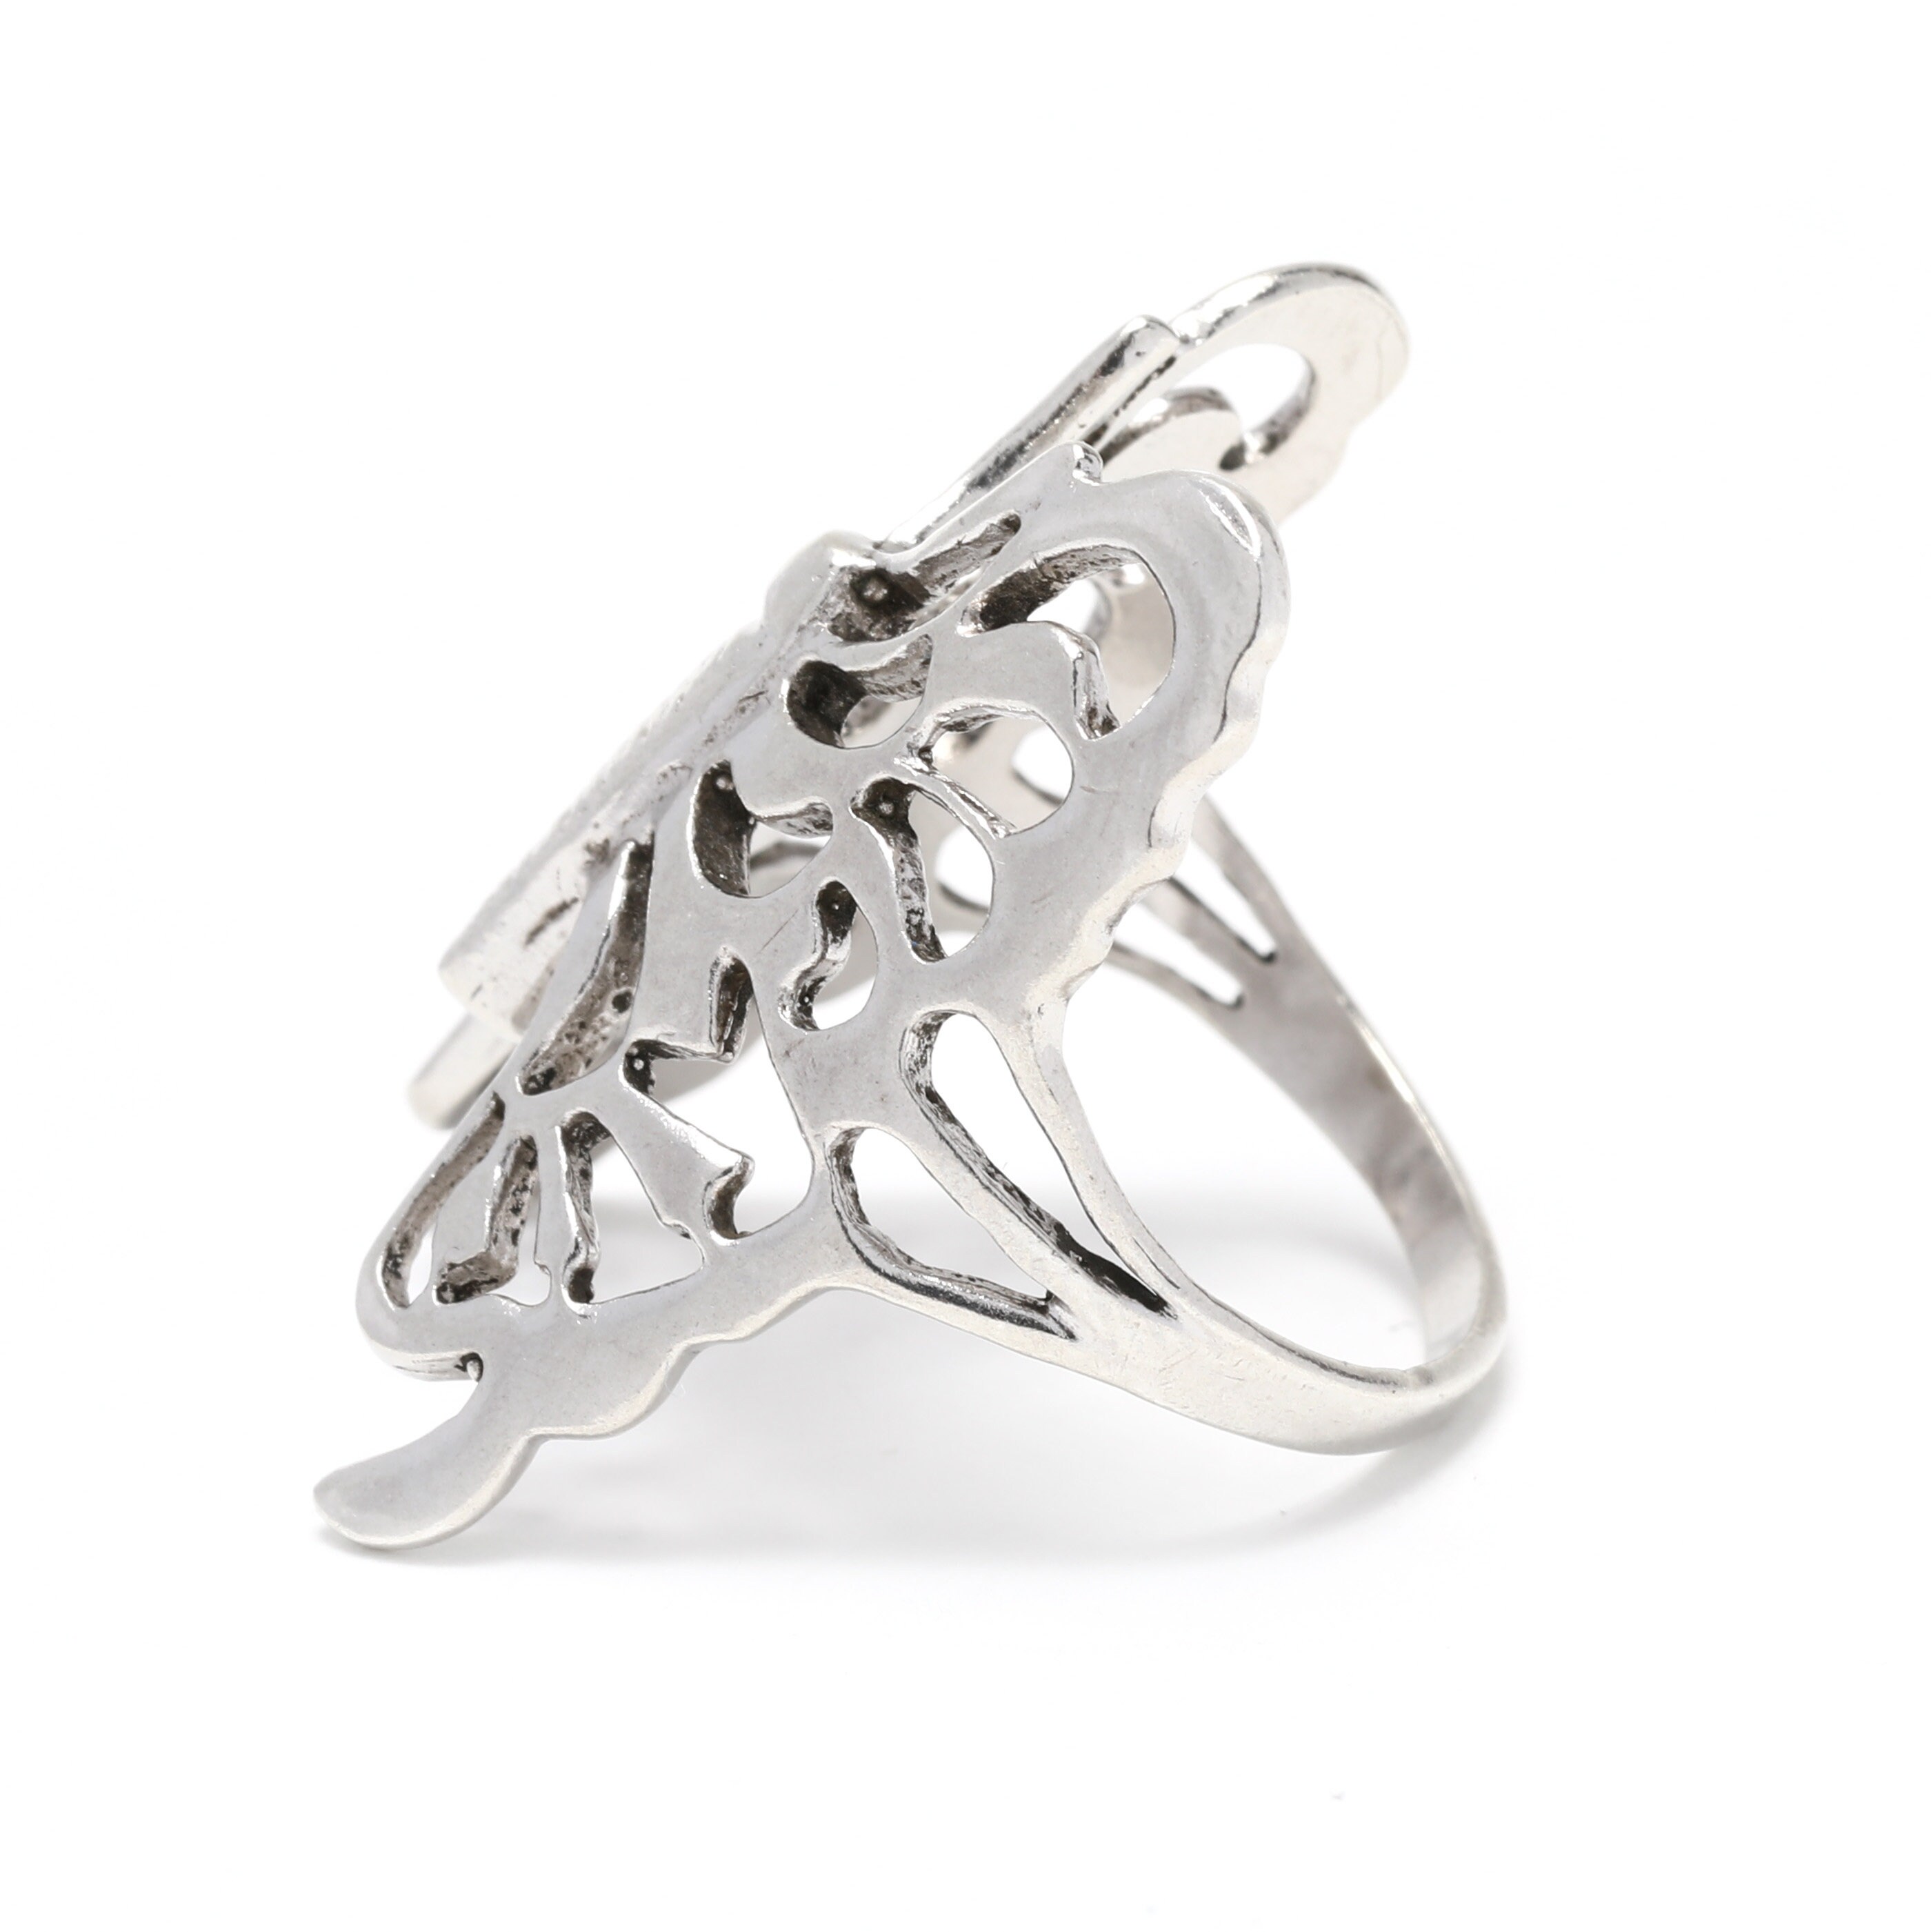 Needles Papillon Ring - Sterling Silver Band, Rings - WNEED21098